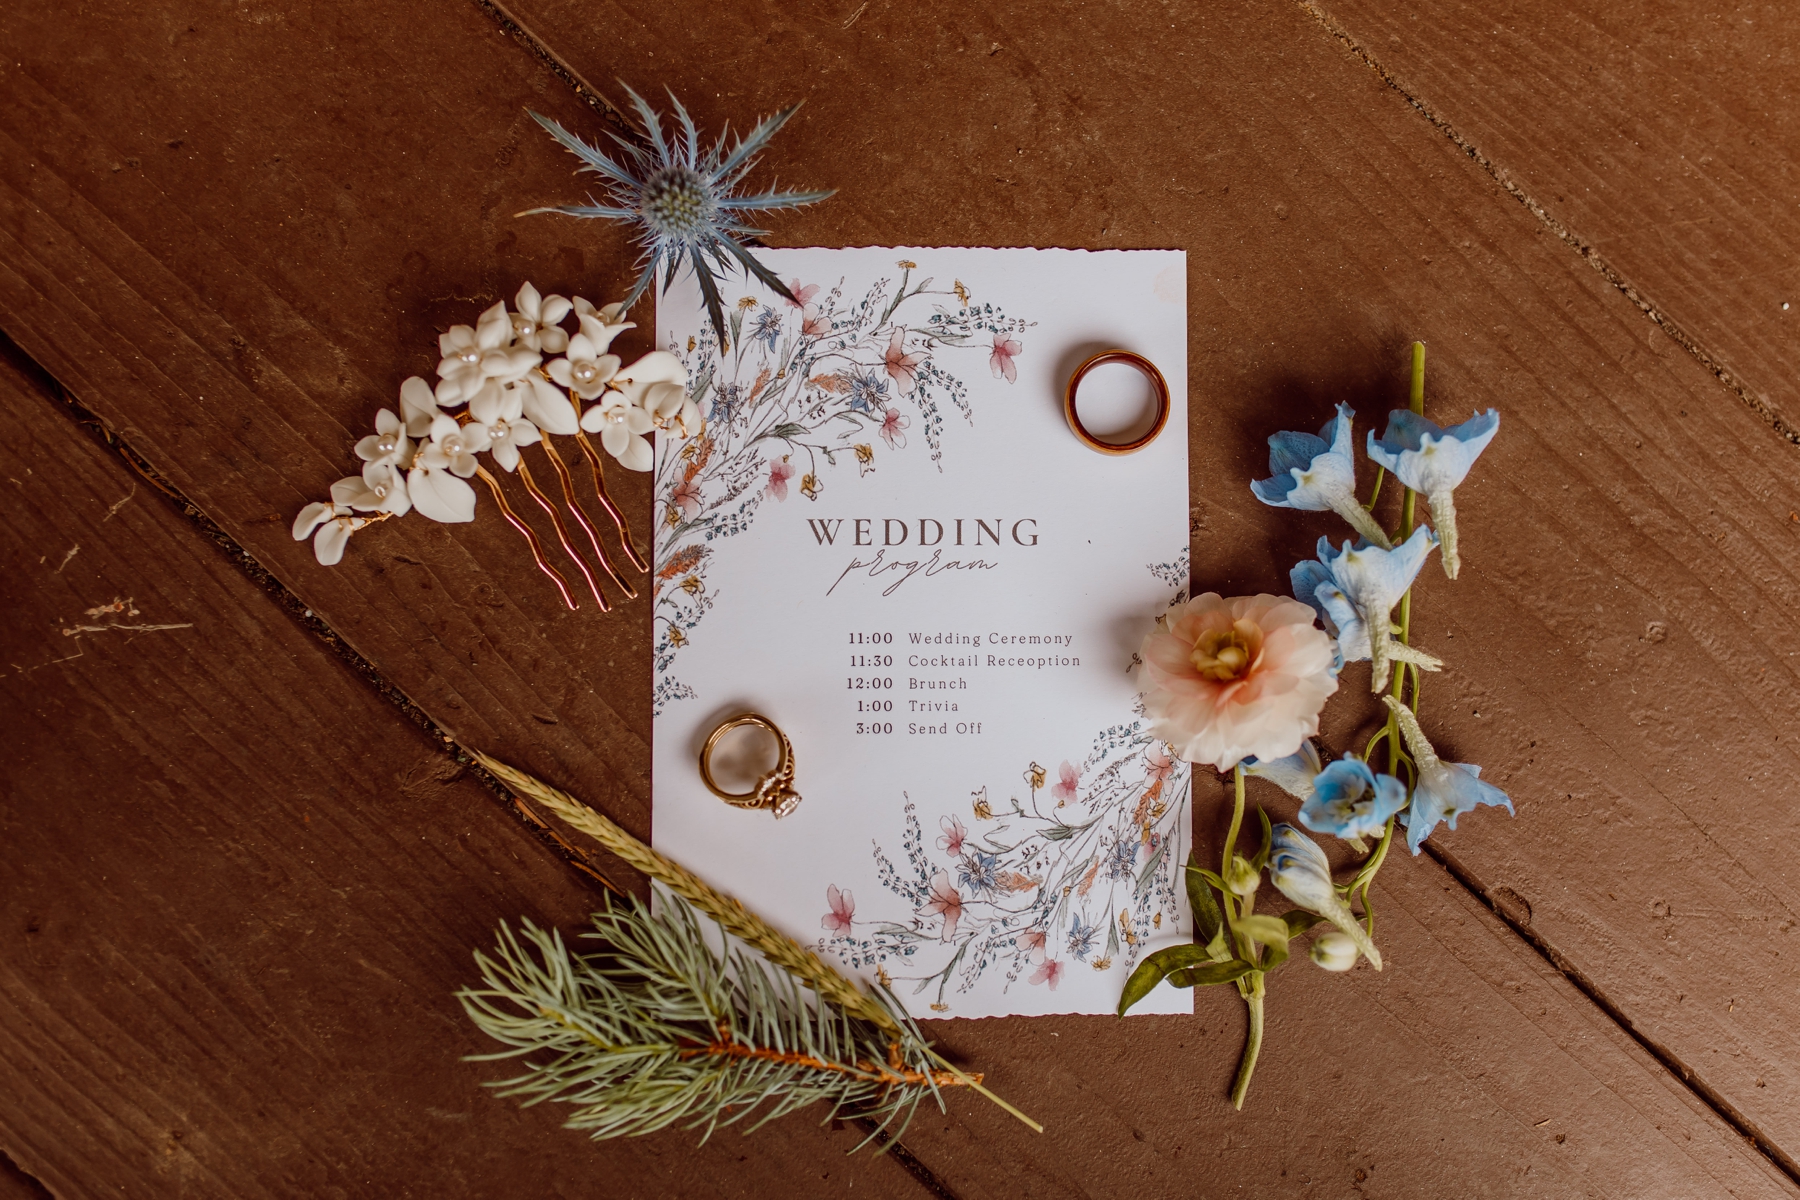 Wildflower wedding program with wedding ring and hair clip